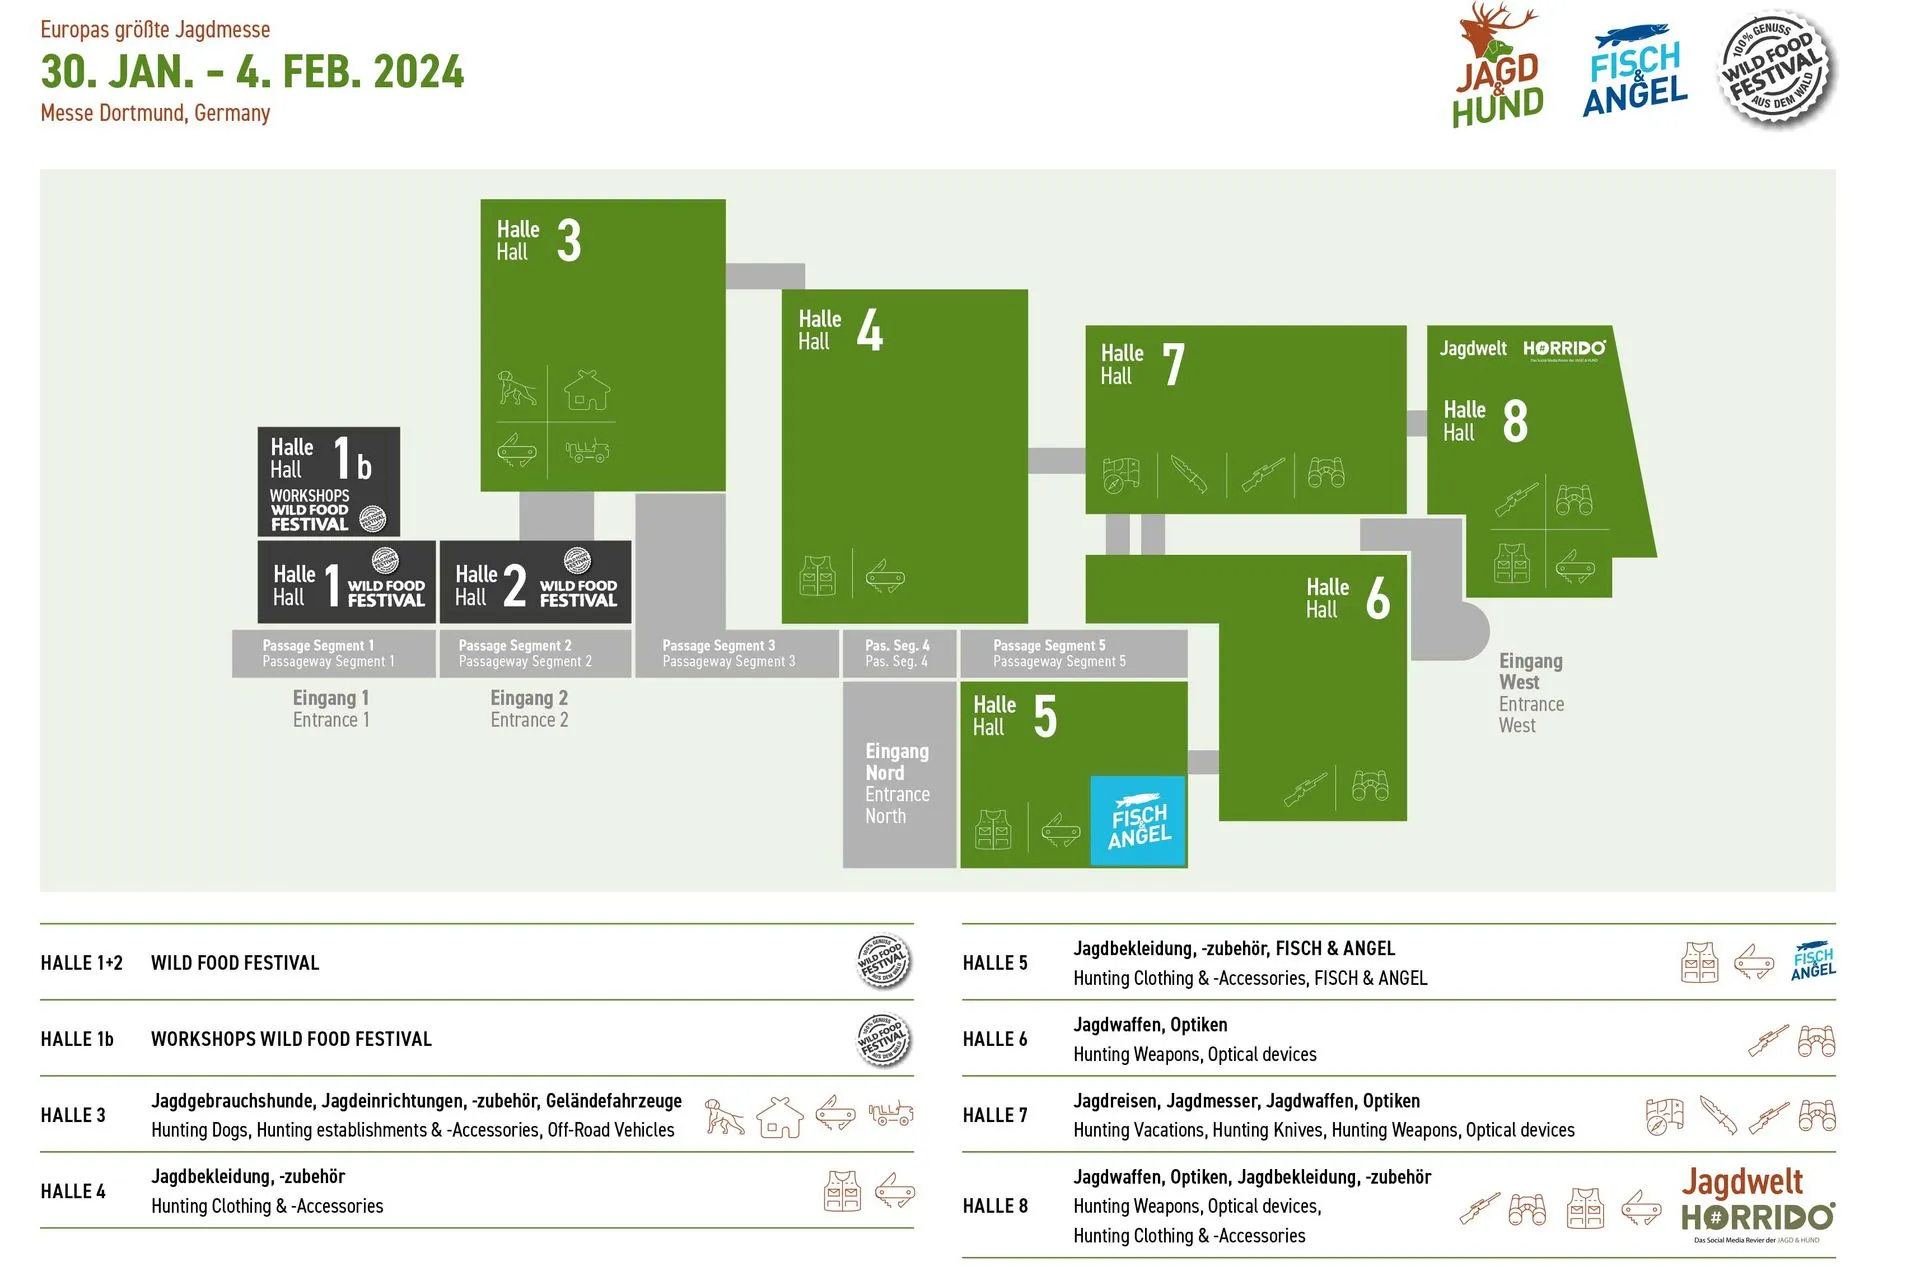 Exhibition plan of Jagd & Hund 2024 with the DDoptics booth in Hall 6